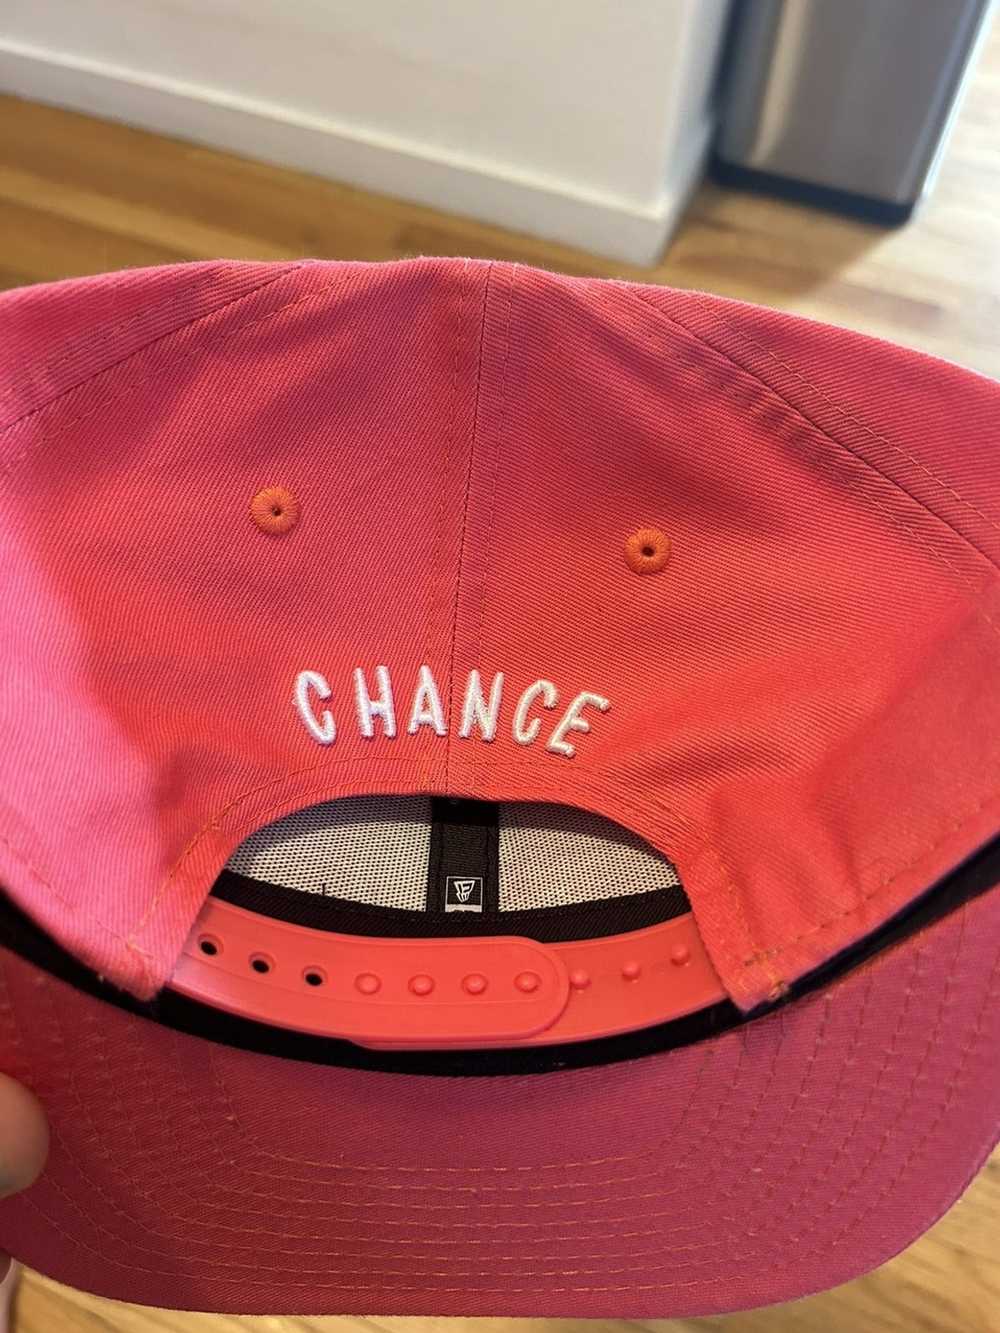 Chance The Rapper Chance the rapper 3 SnapBack - image 2